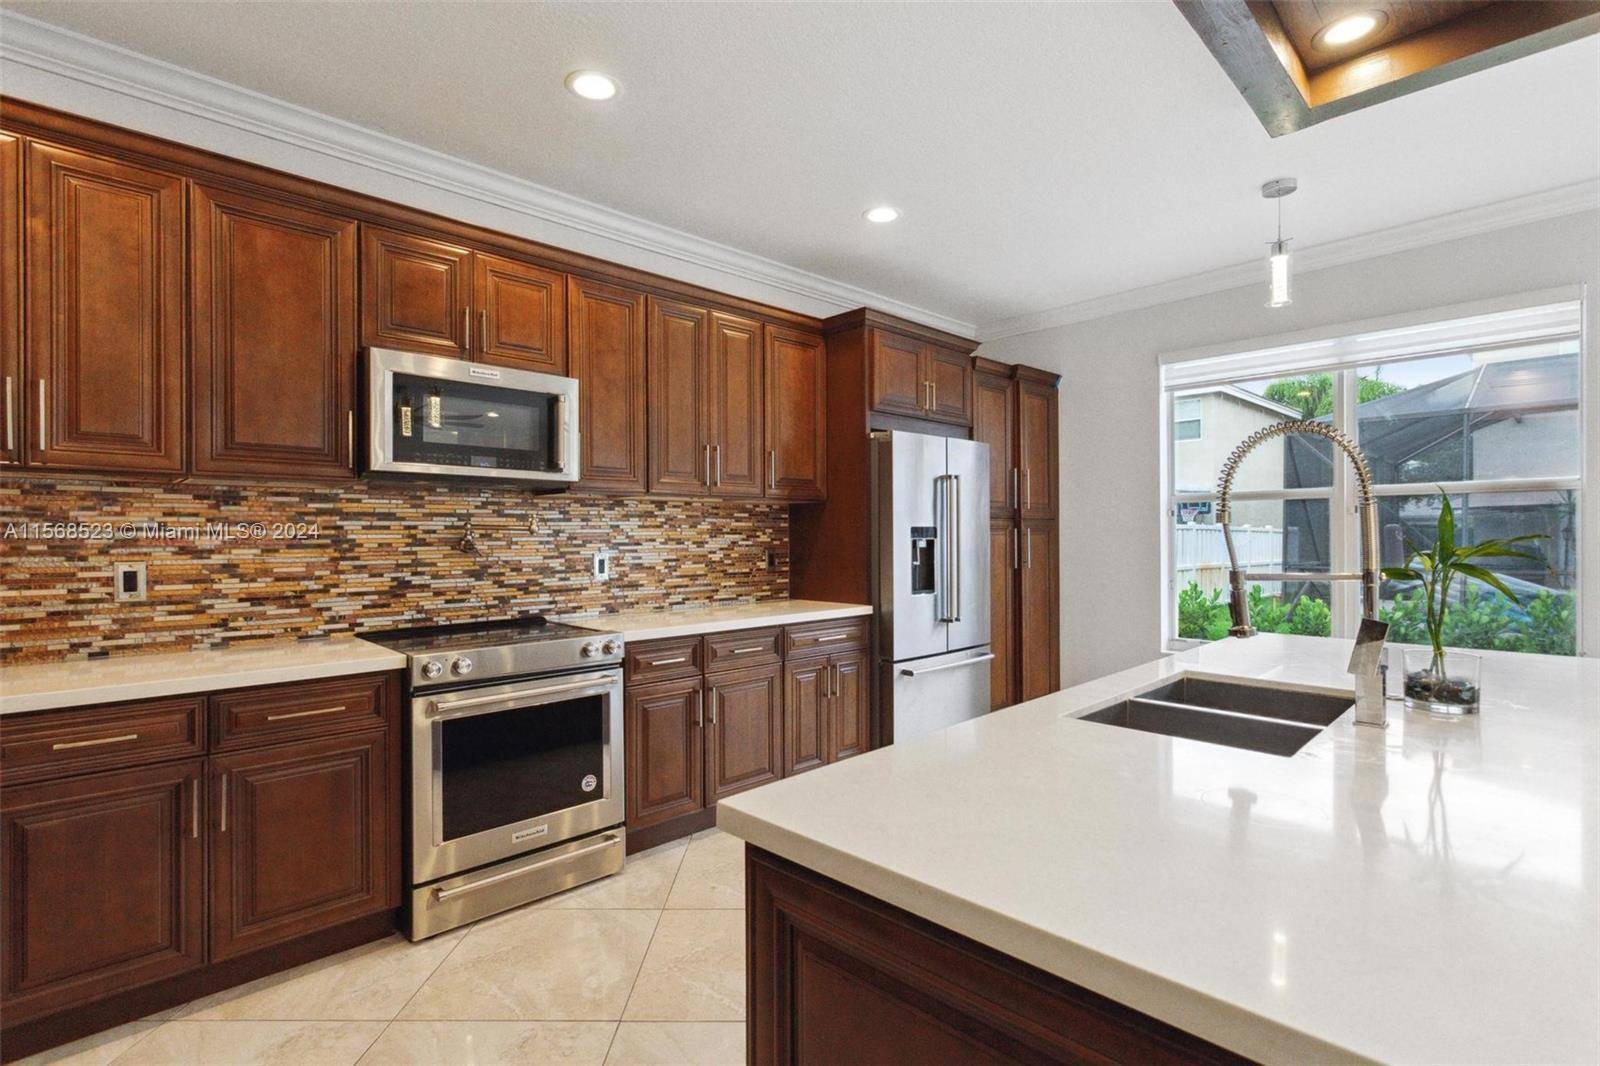 Welcome to this exceptional home that offers the perfect combination of space, style location.